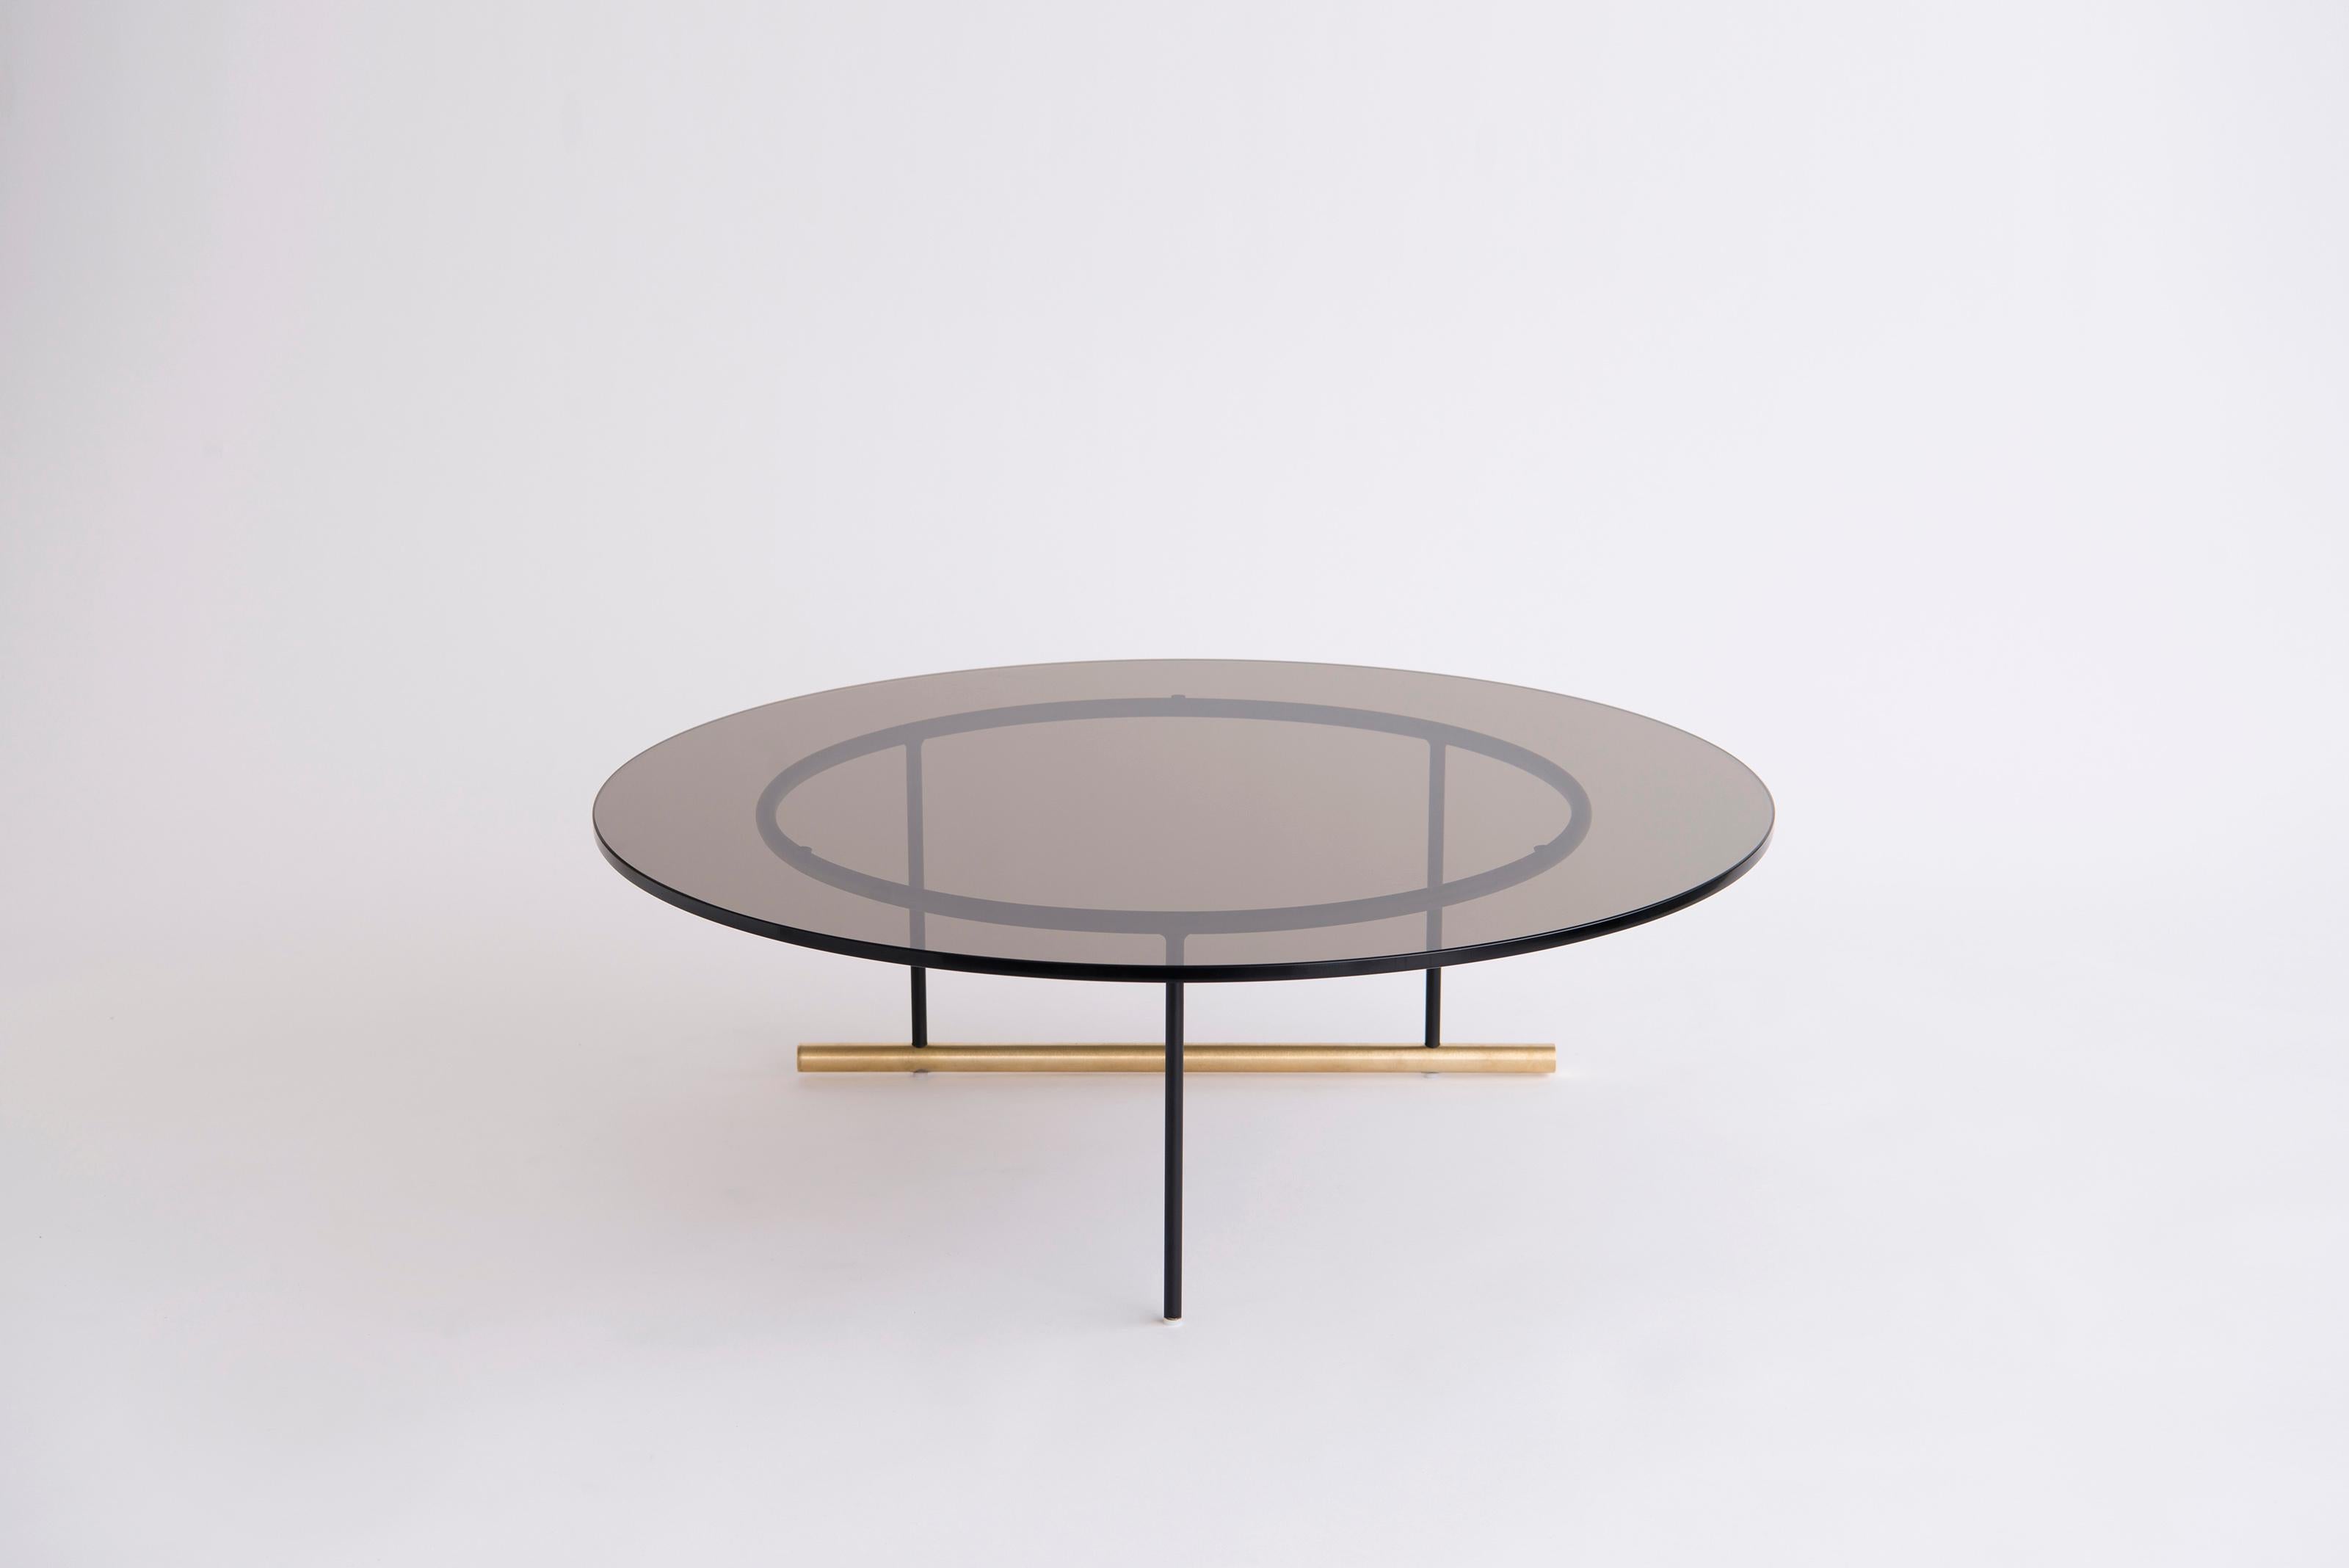 Icon Large Glass Coffee Table by Phase Design
Dimensions: Ø 88.9 x H 38.1 cm. 
Materials: Glass, powder-coated metal and brushed brass.

Solid steel and brass with glass, marble, or solid wooden tops. Steel bar available in a flat black or white